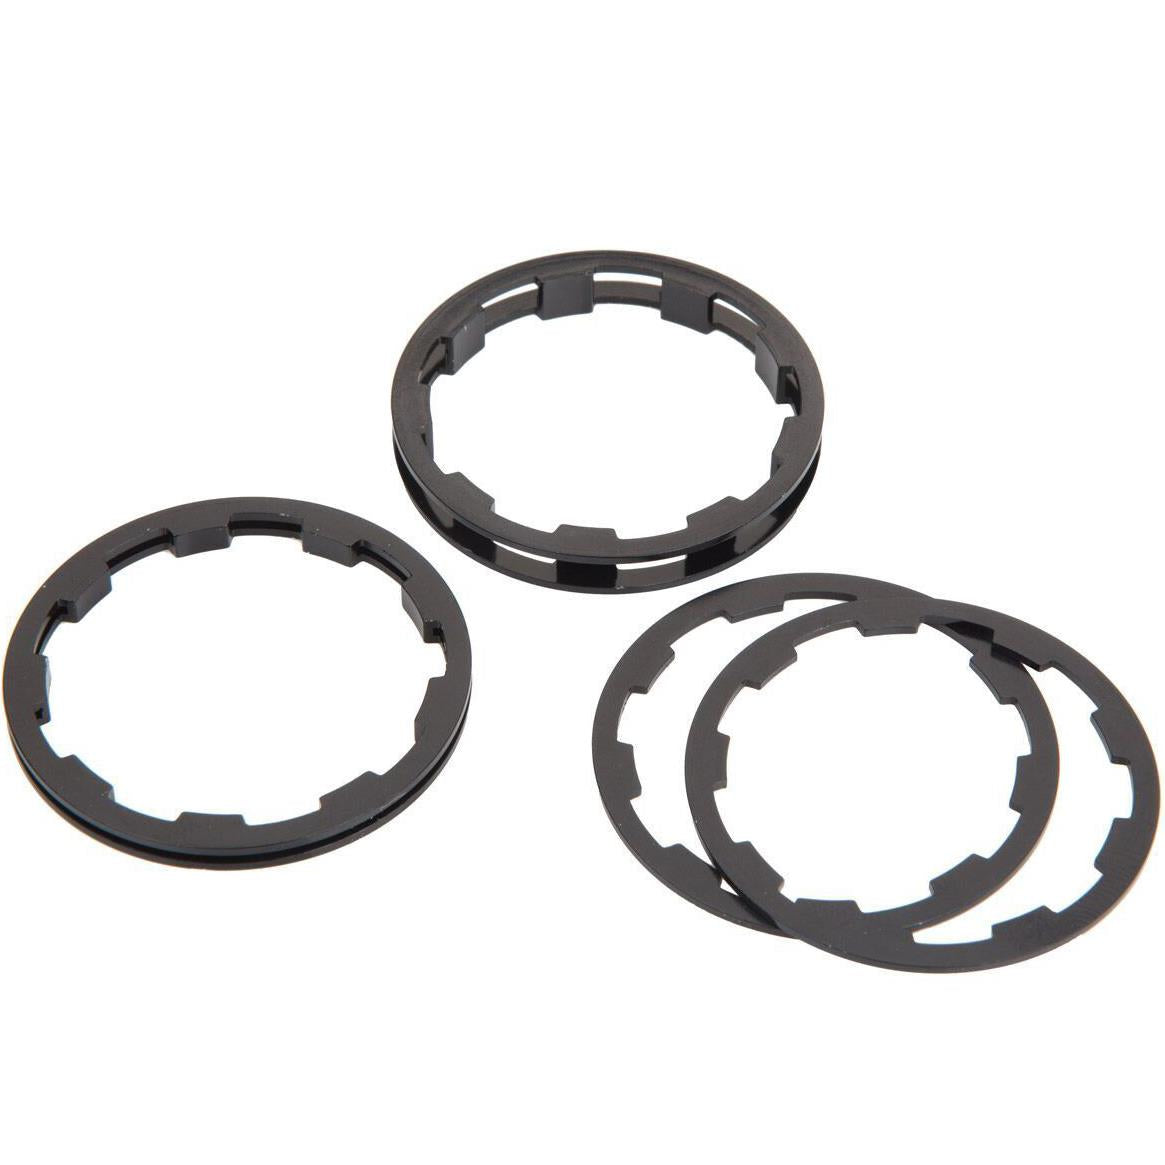 Box One Race Cassette Spacer-Kits